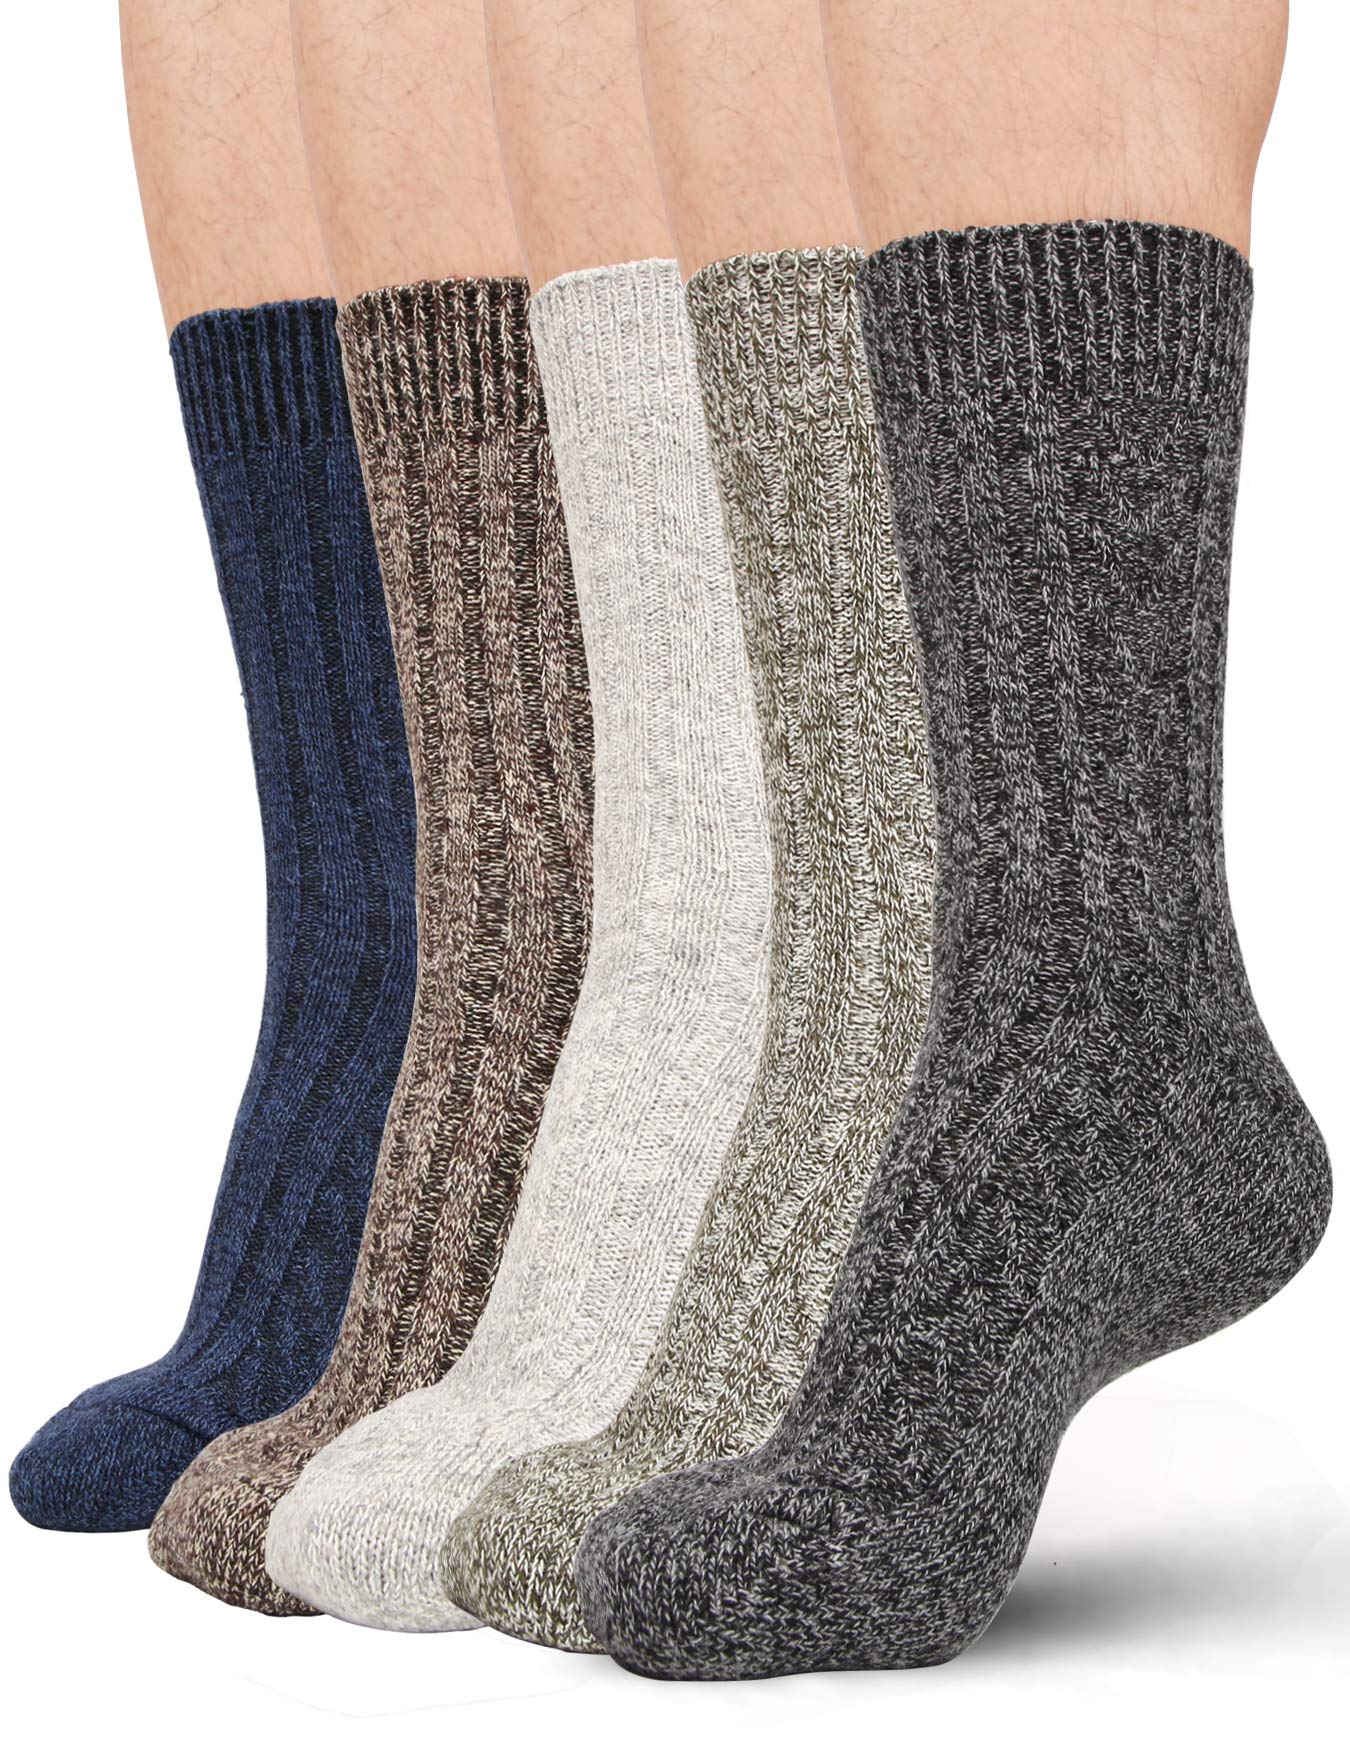 Knit Wool Blend Warm Crew Sock Causal for Man 5 Pack - Moon Wood